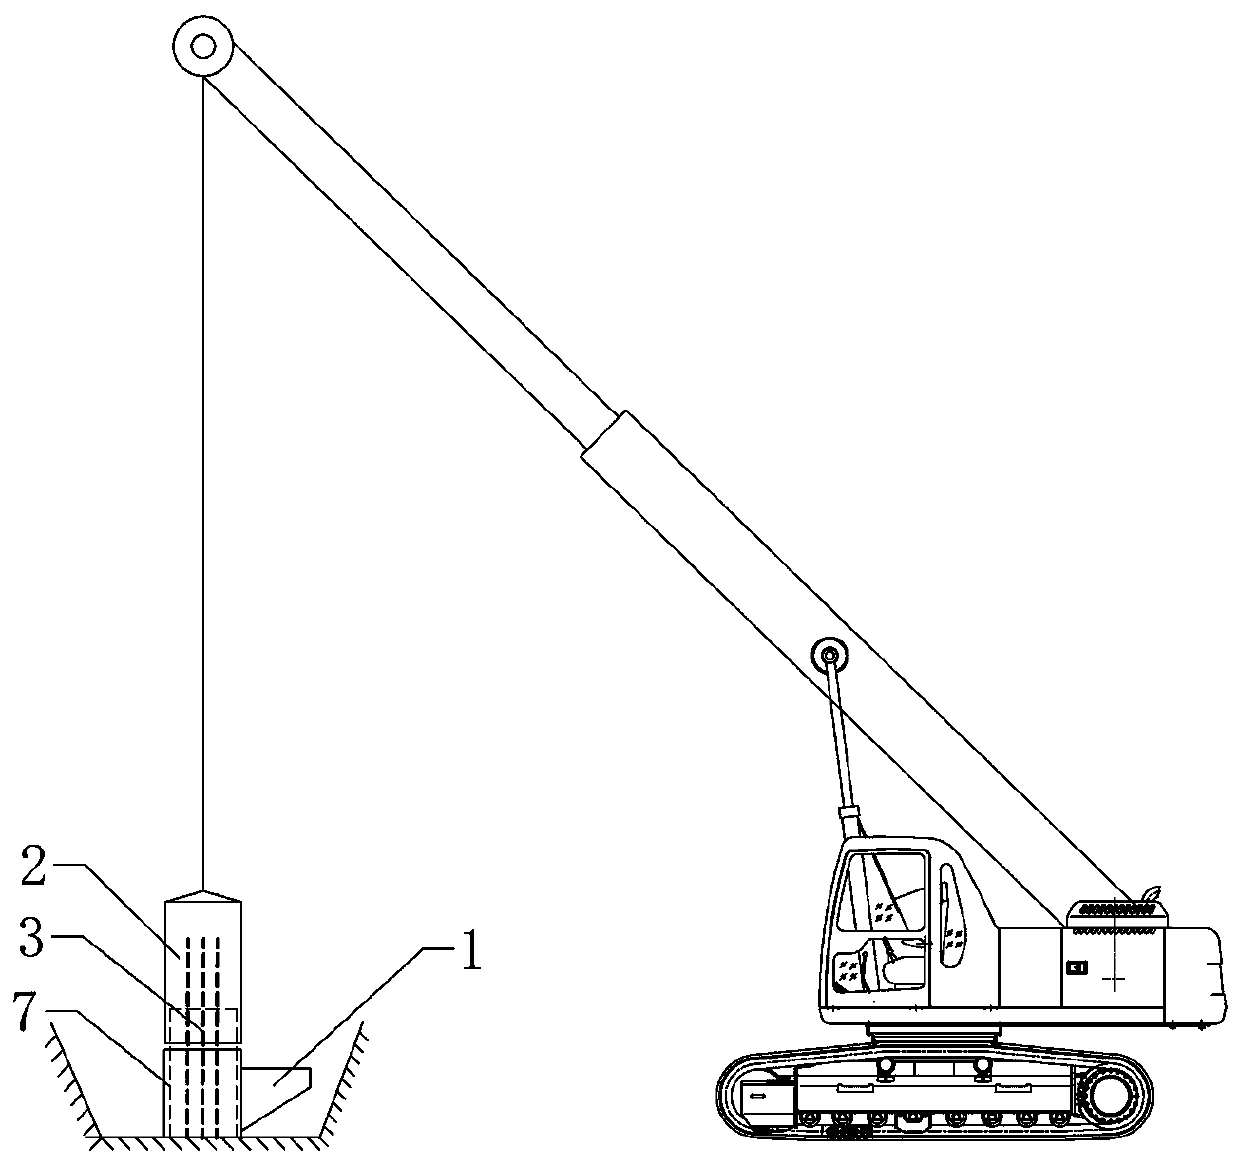 A method for pulling out prestressed pipe piles of a bridge abutment and its supporting equipment